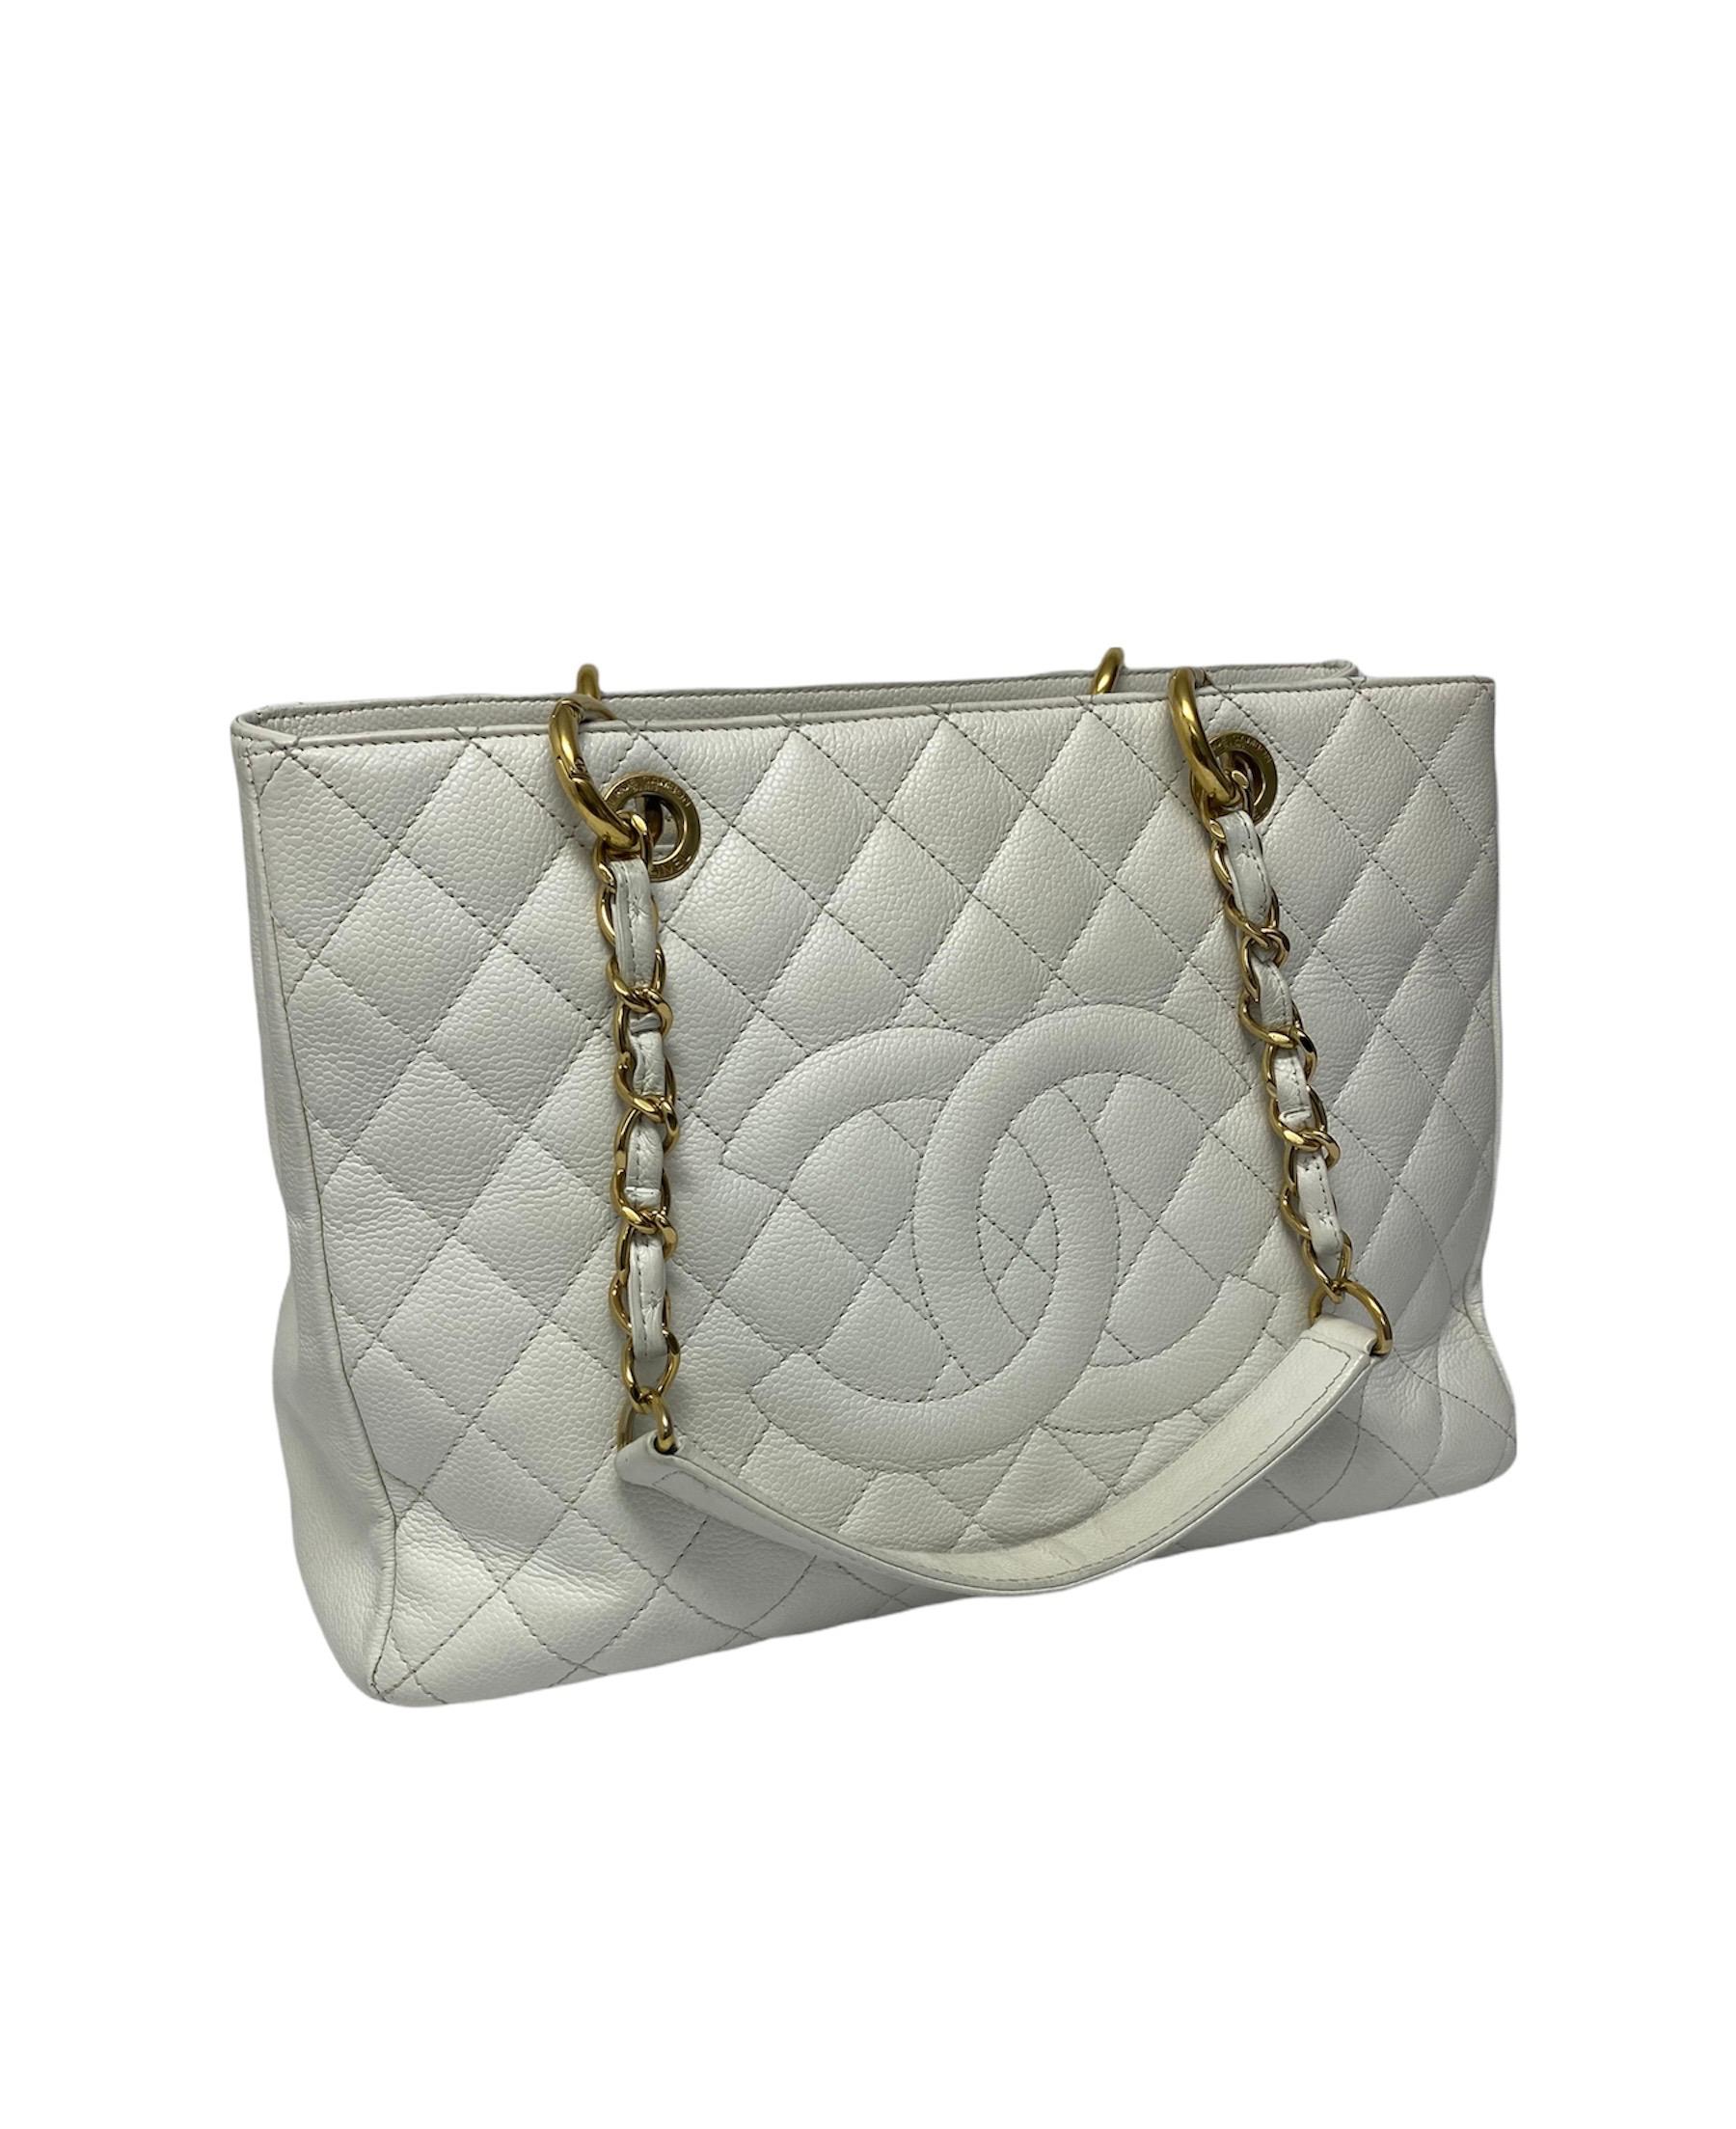 Chanel GST edition bag in white quilted leather with gold hardware.It has a wide central opening and two handles made with a woven chain and black leather. The interiors are lined with a soft gray fabric and inside it is made up of three large